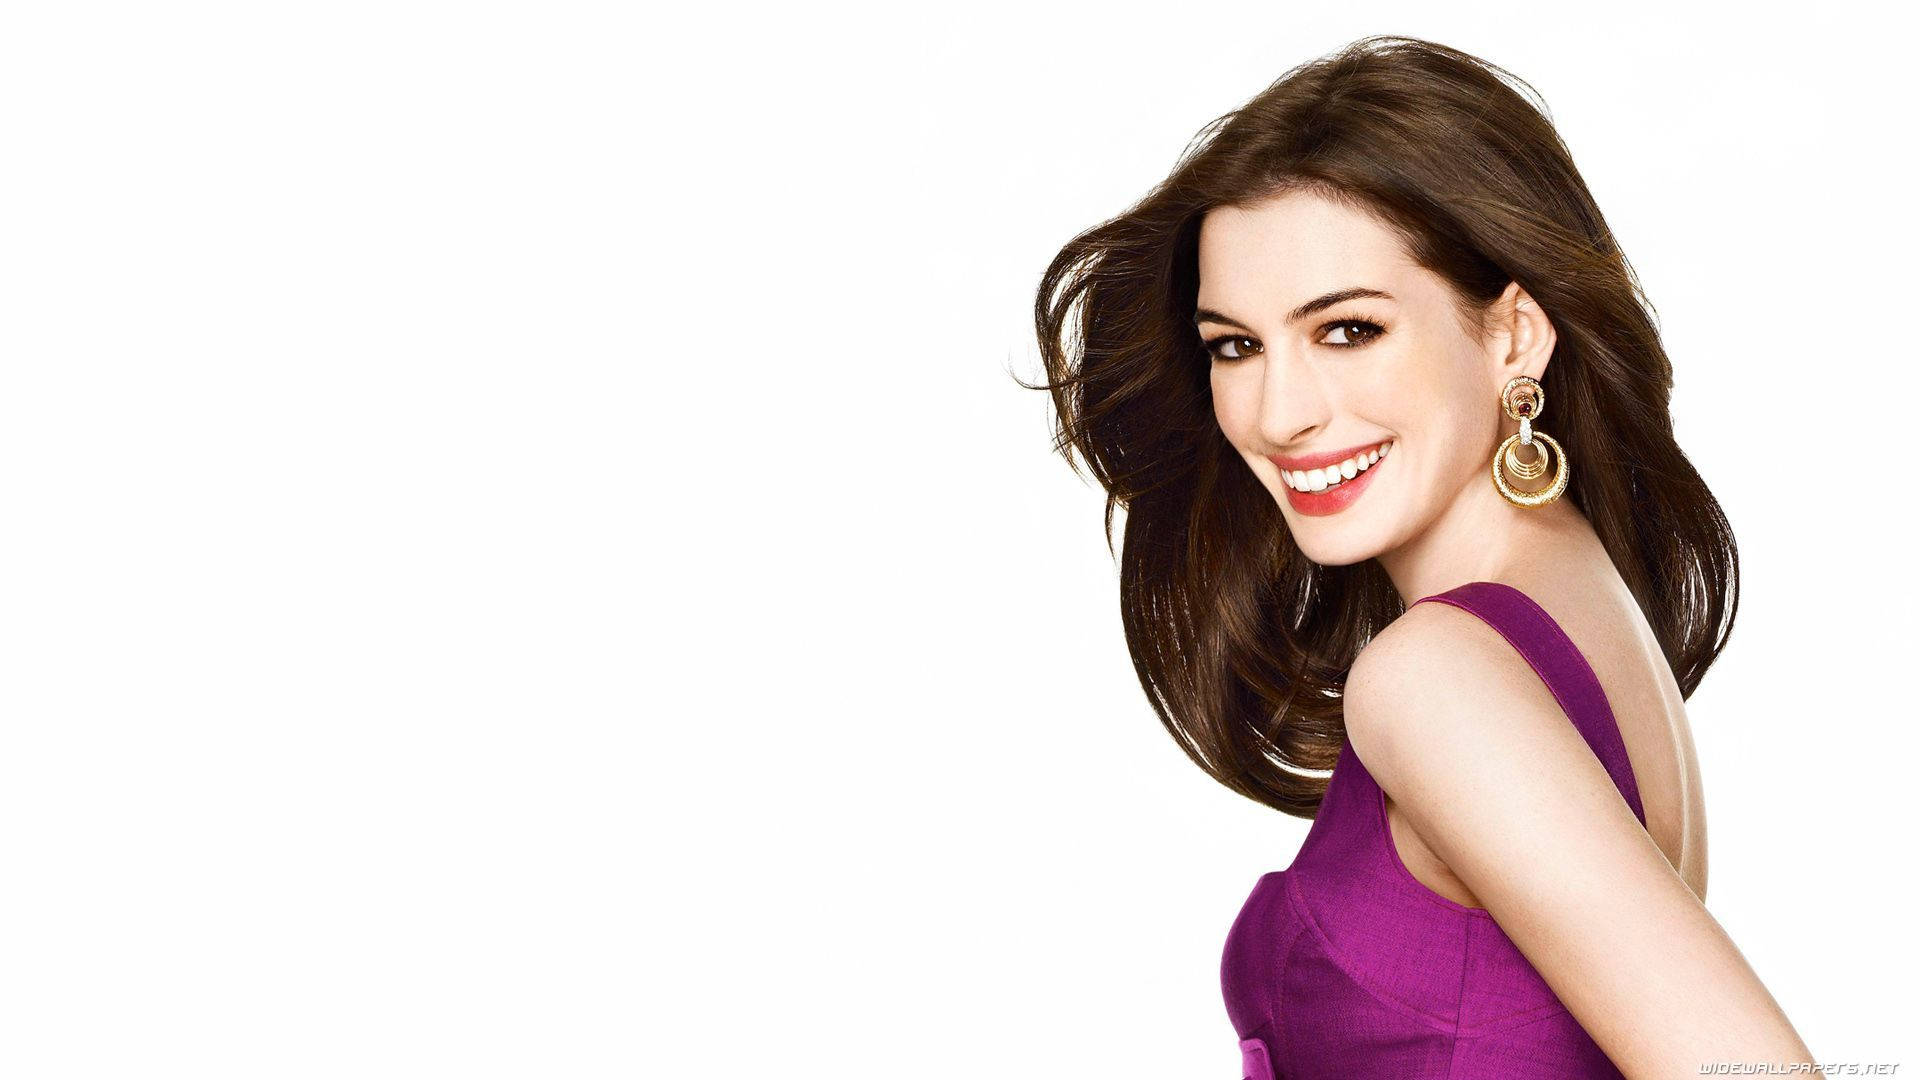 Anne Hathaway In A Stunning Purple Dress Smiling For The Camera Background